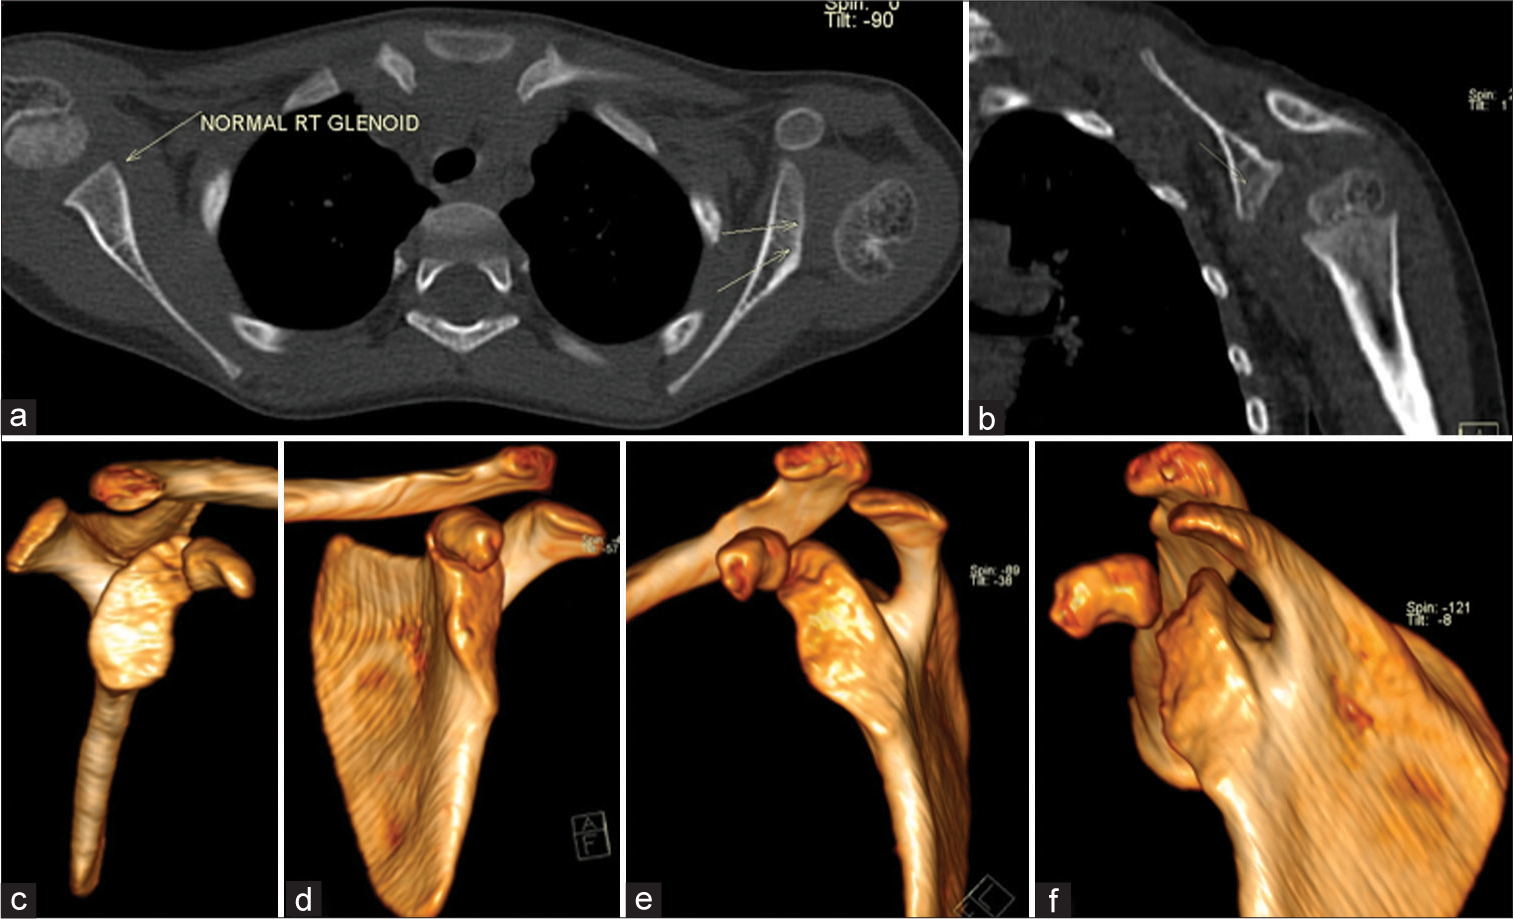 (a) Computed tomography axial image showing normal right glenoid, retroverted and dysplastic left glenoid with posterior dislocation of humeral head. (b) Coronal reformatted image showing retroverted glenoid. (c) Virtual reality (VR) image showing normal right glenoid cavity. (df) VR image showing retroverted glenoid with false glenoid cavity formation in the inferior aspect of anatomic glenoid.